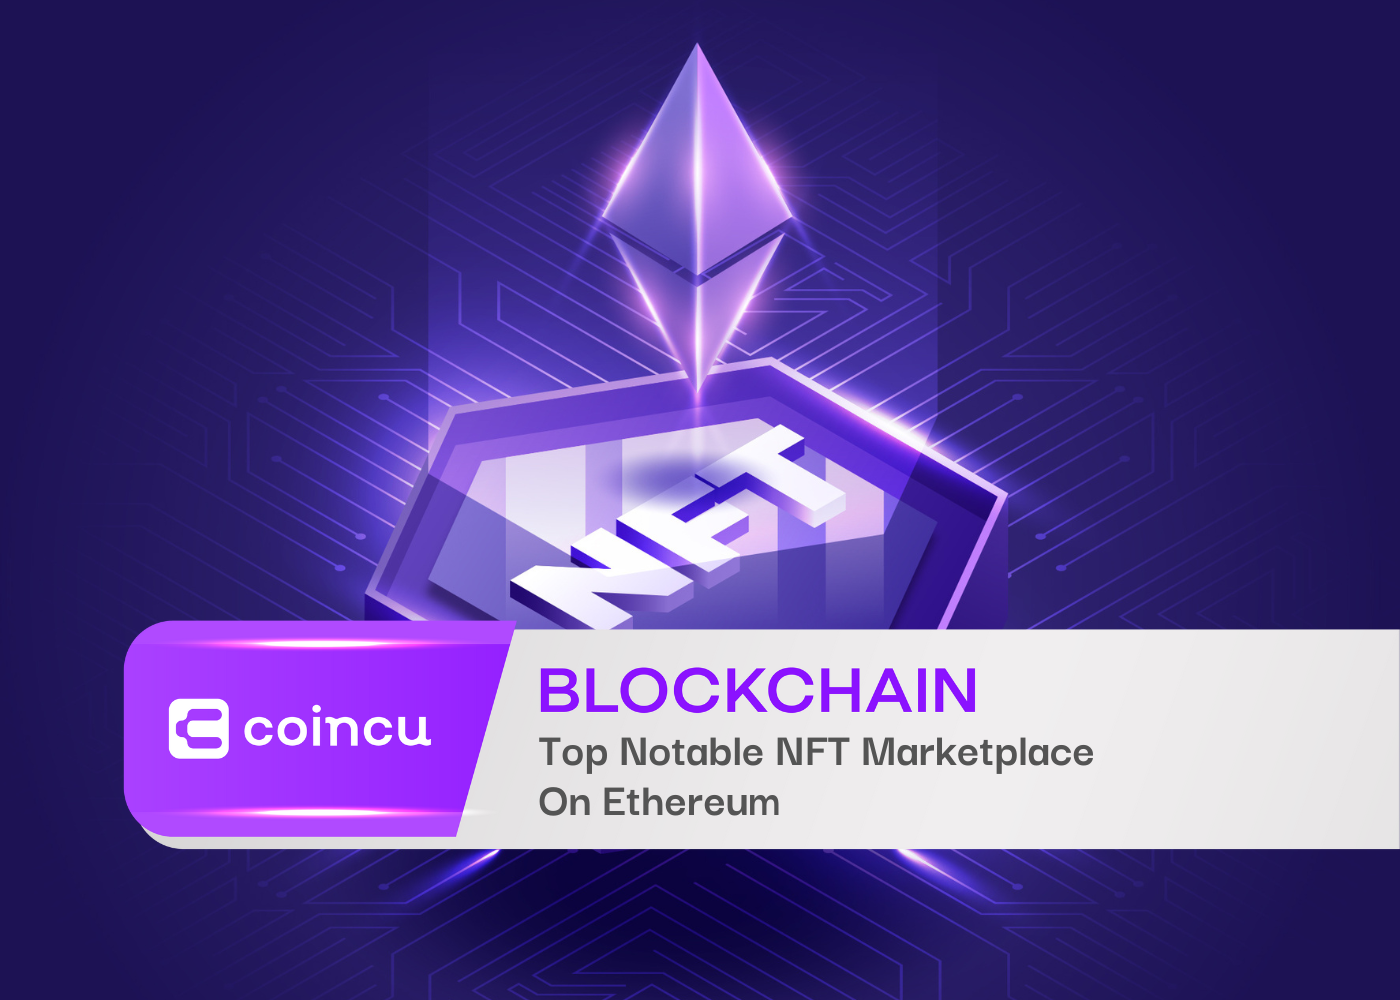 Top Notable NFT Marketplace On Ethereum